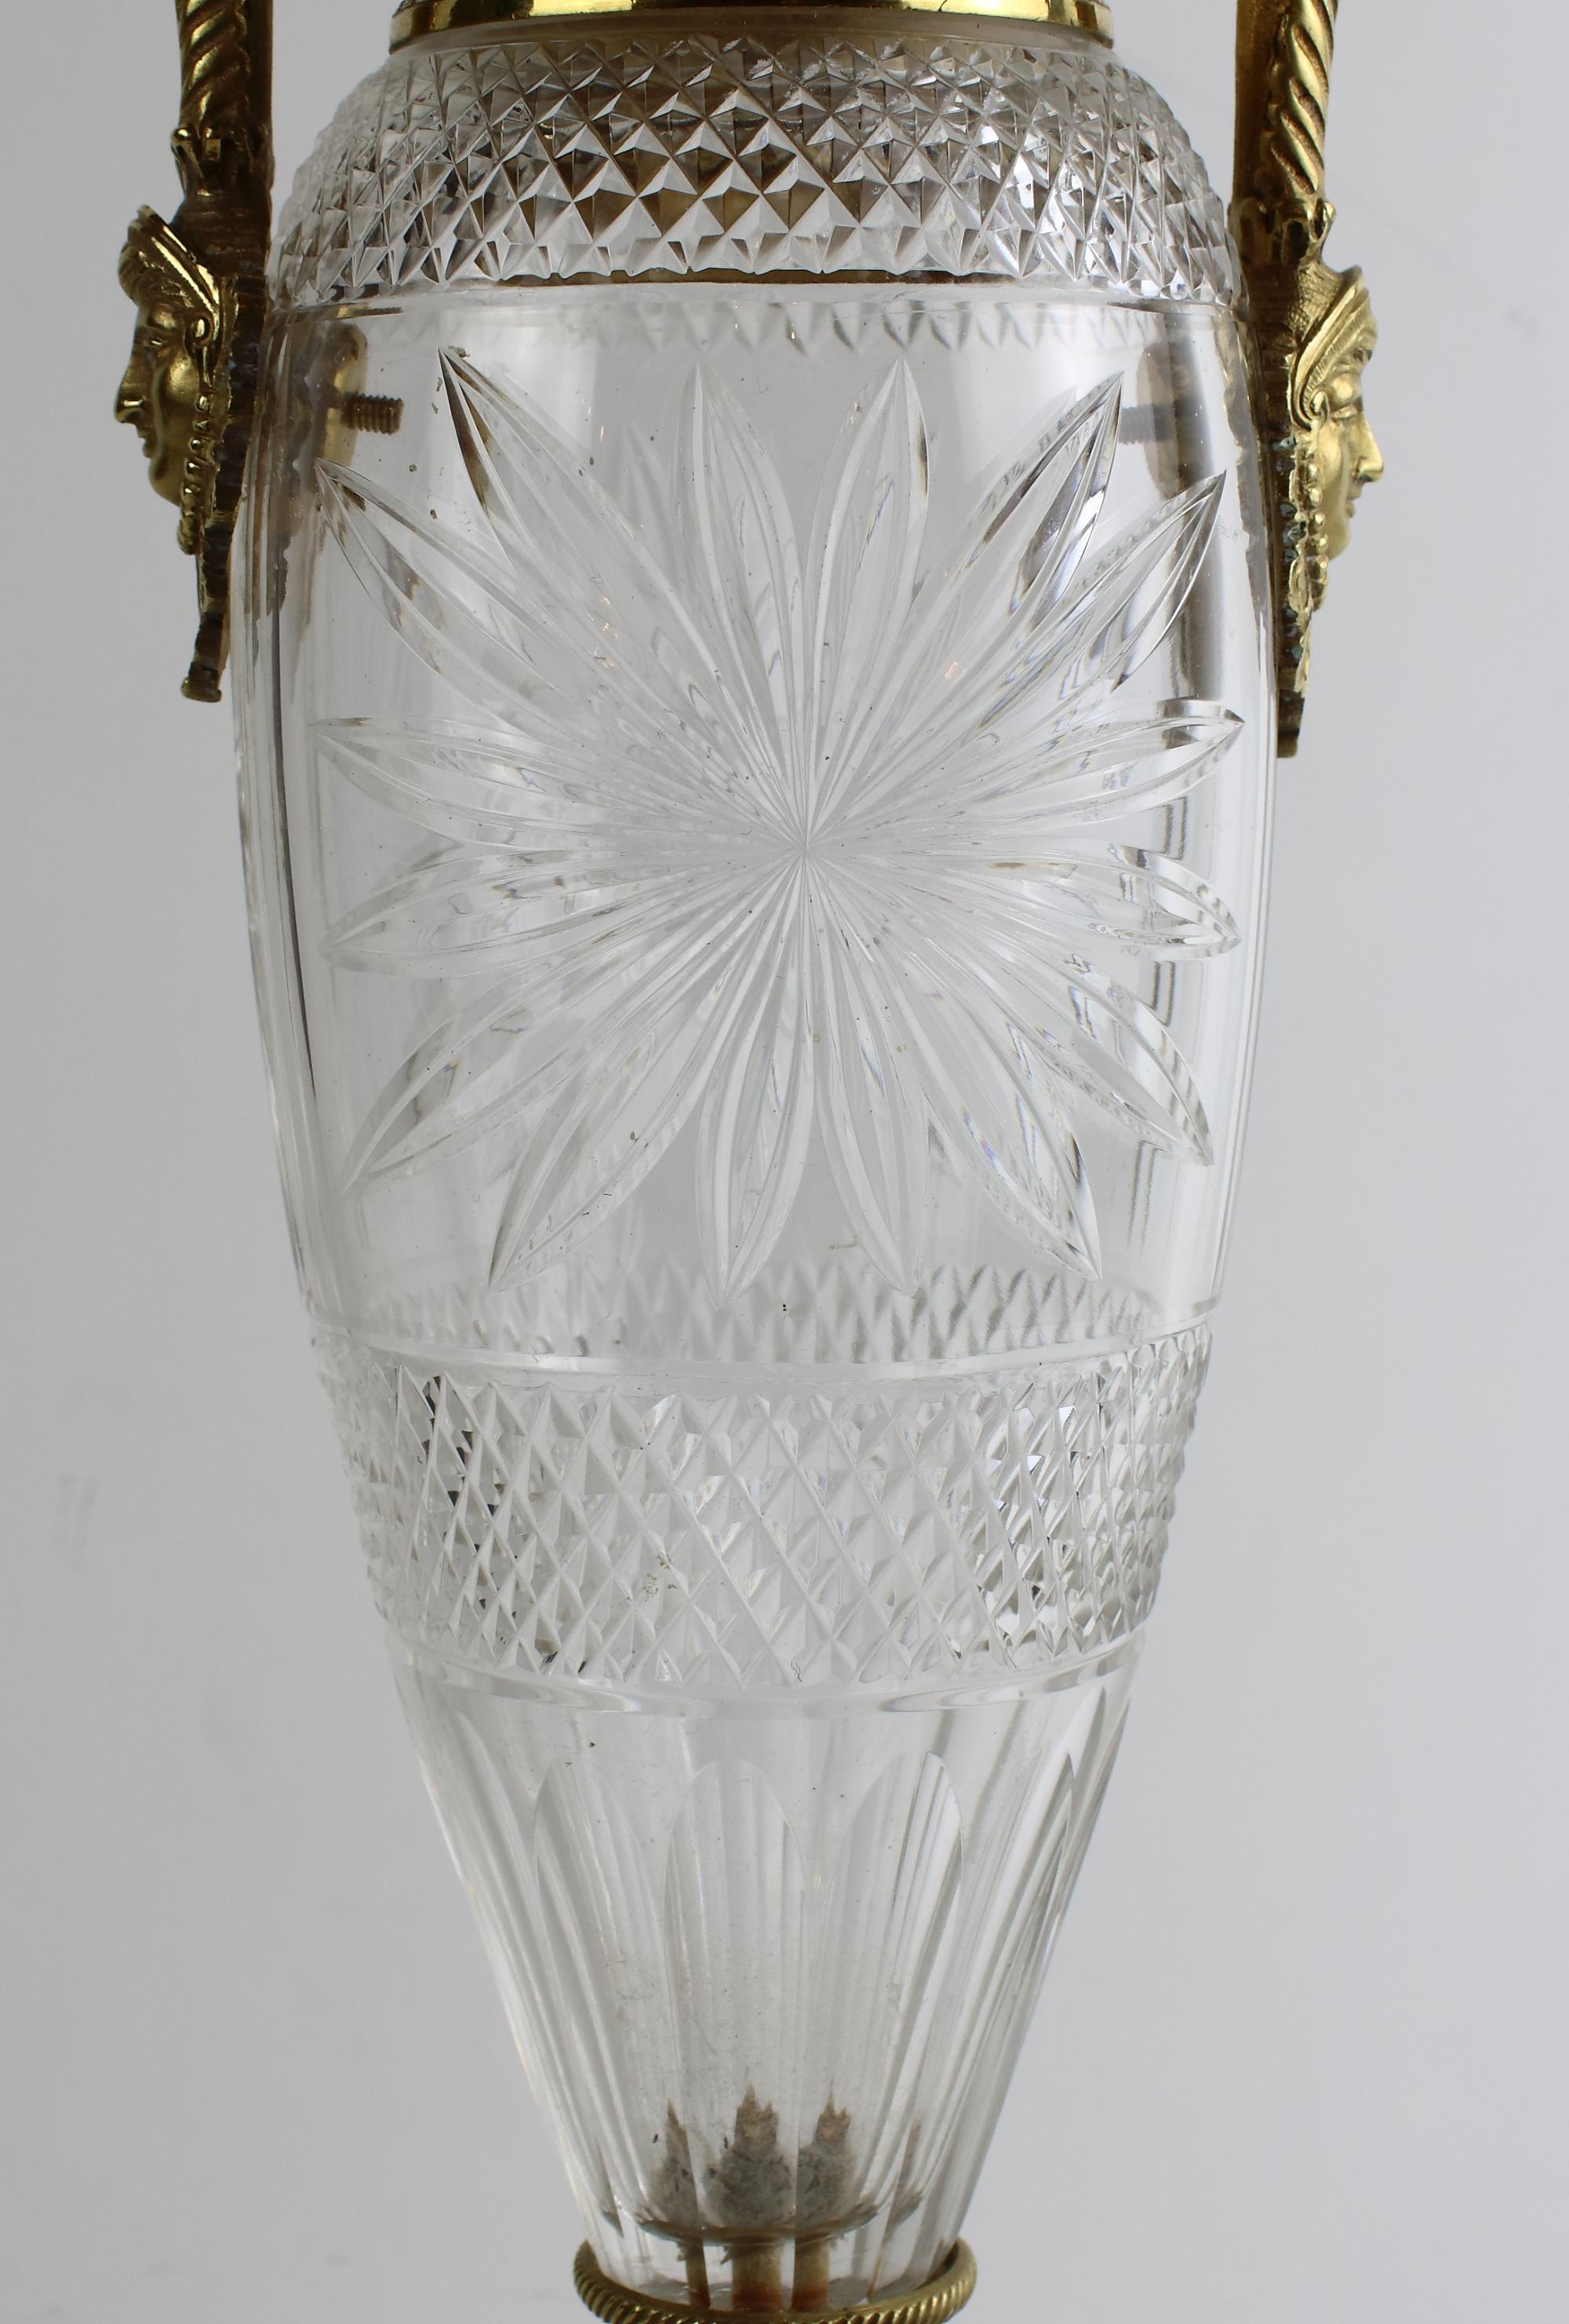 French 19th Century Empire Gilt Bronze and Cut Crystal Glass Amphora Vase For Sale 5